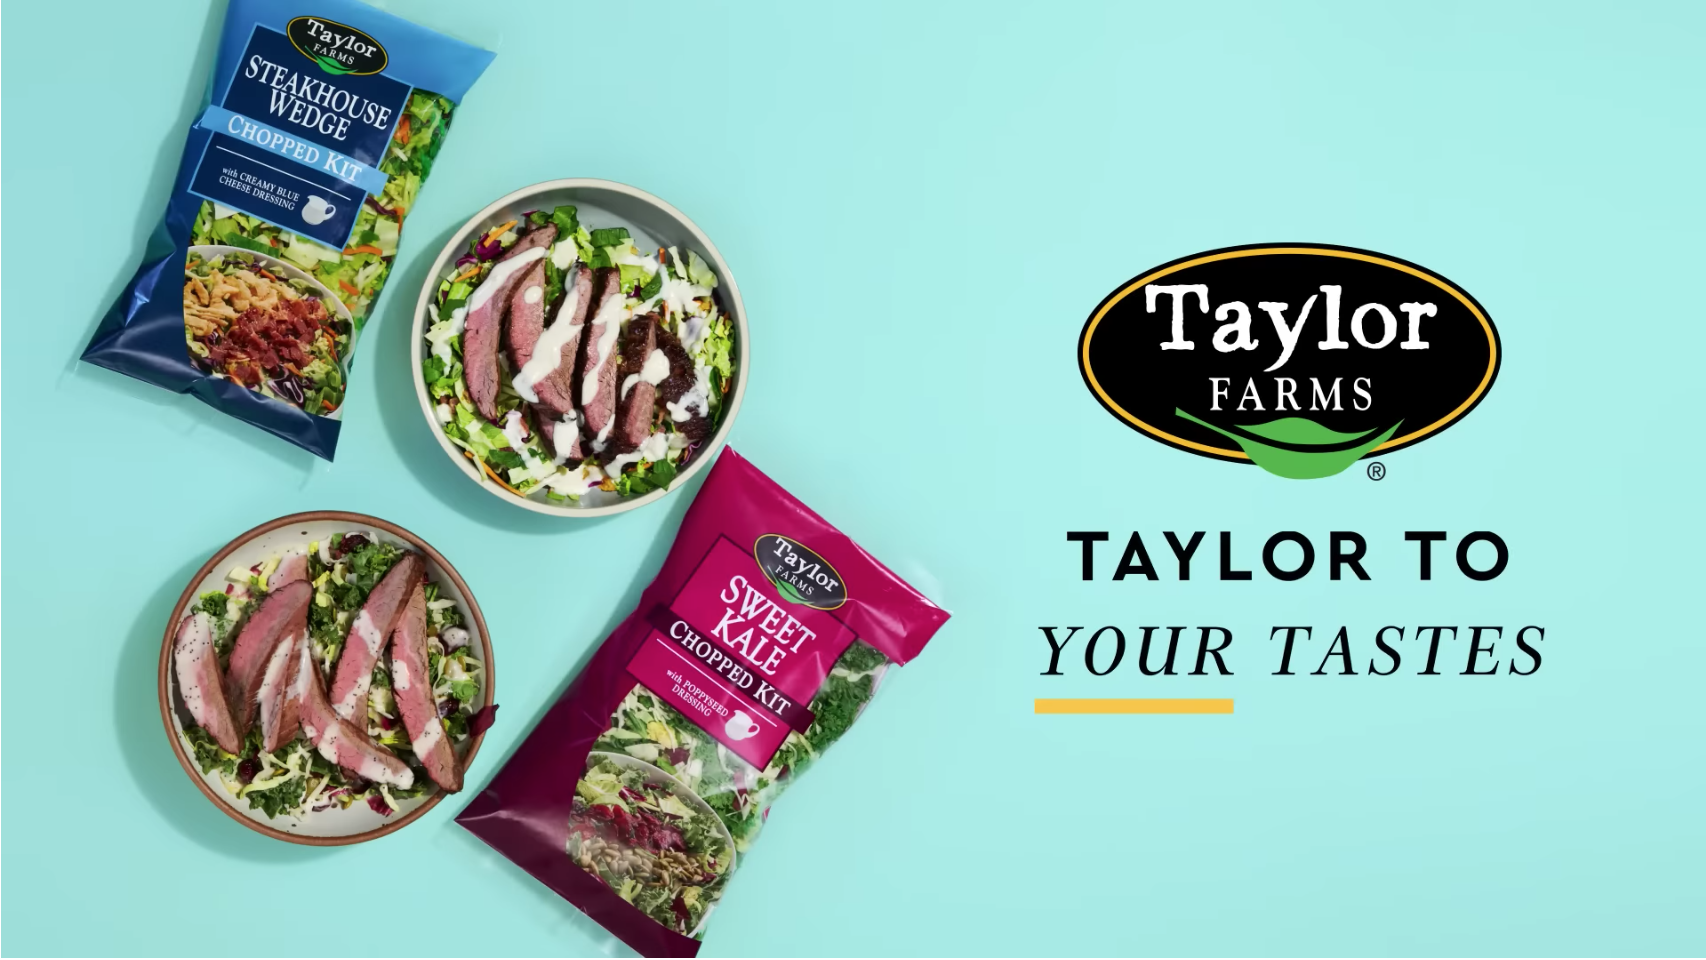 https://www.taylorfarms.com/wp-content/uploads/2021/04/Steakhouse-Wedge-Salad-YouTube-Video.png